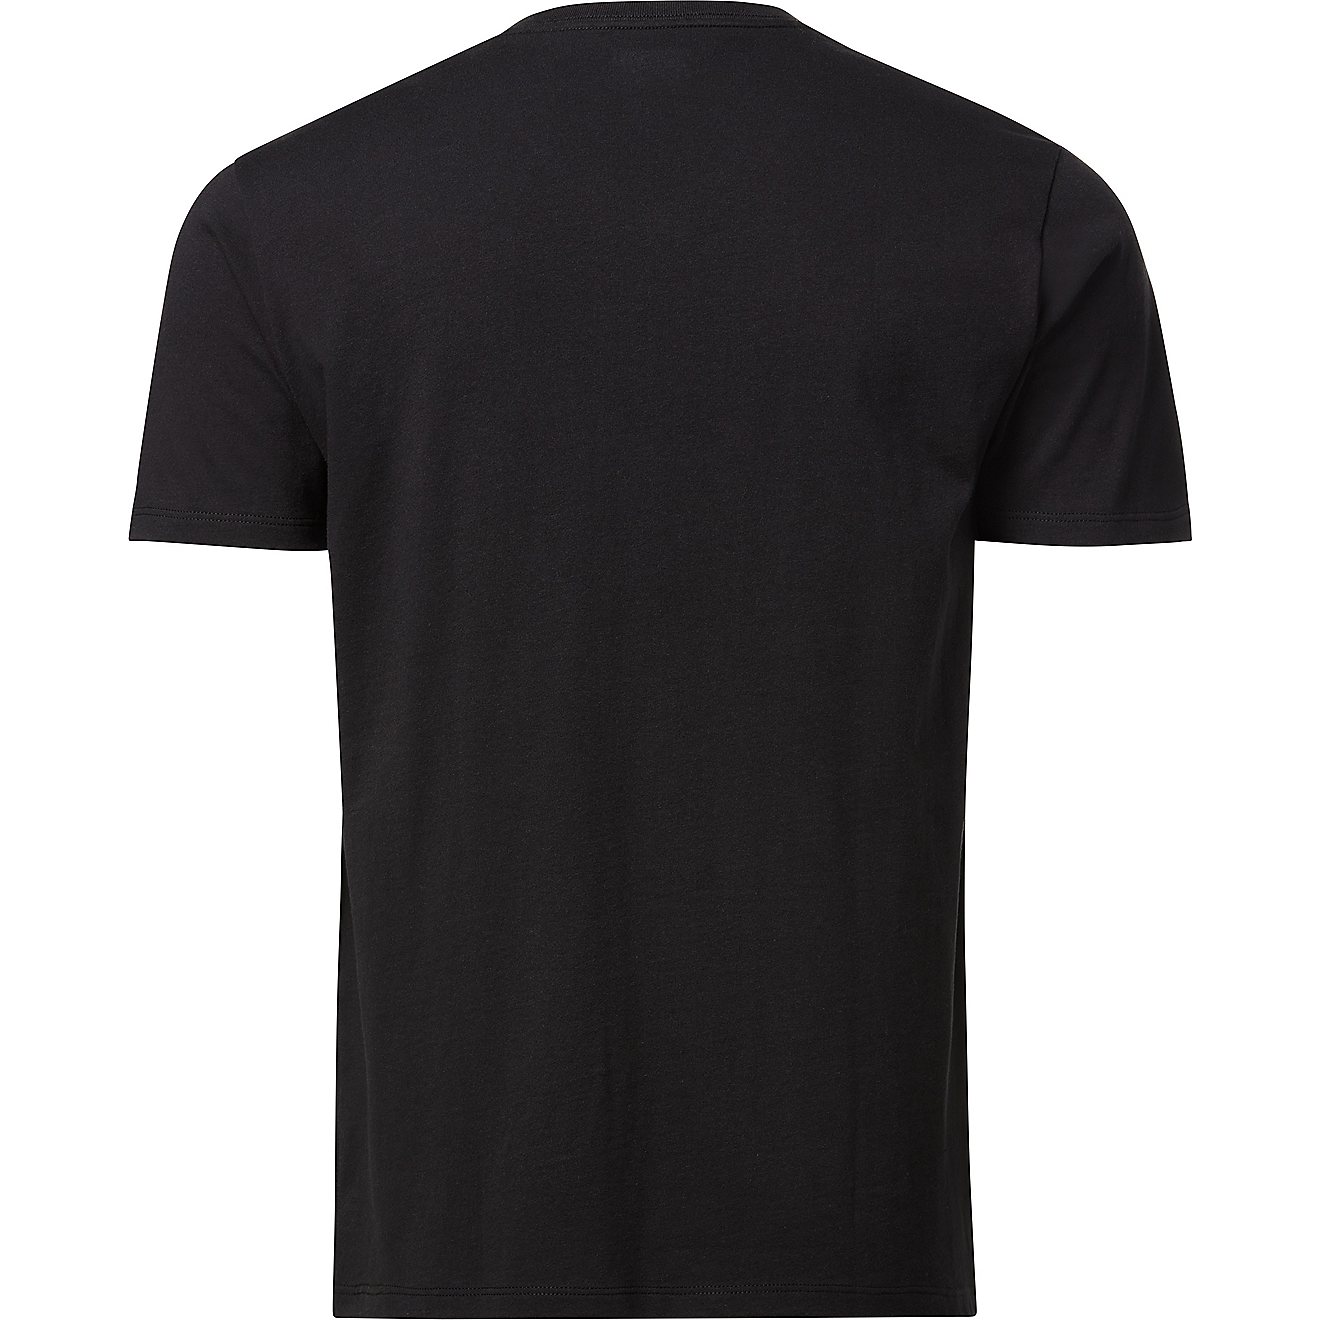 BCG Men's Styled Cotton V-Neck T-shirt                                                                                           - view number 2